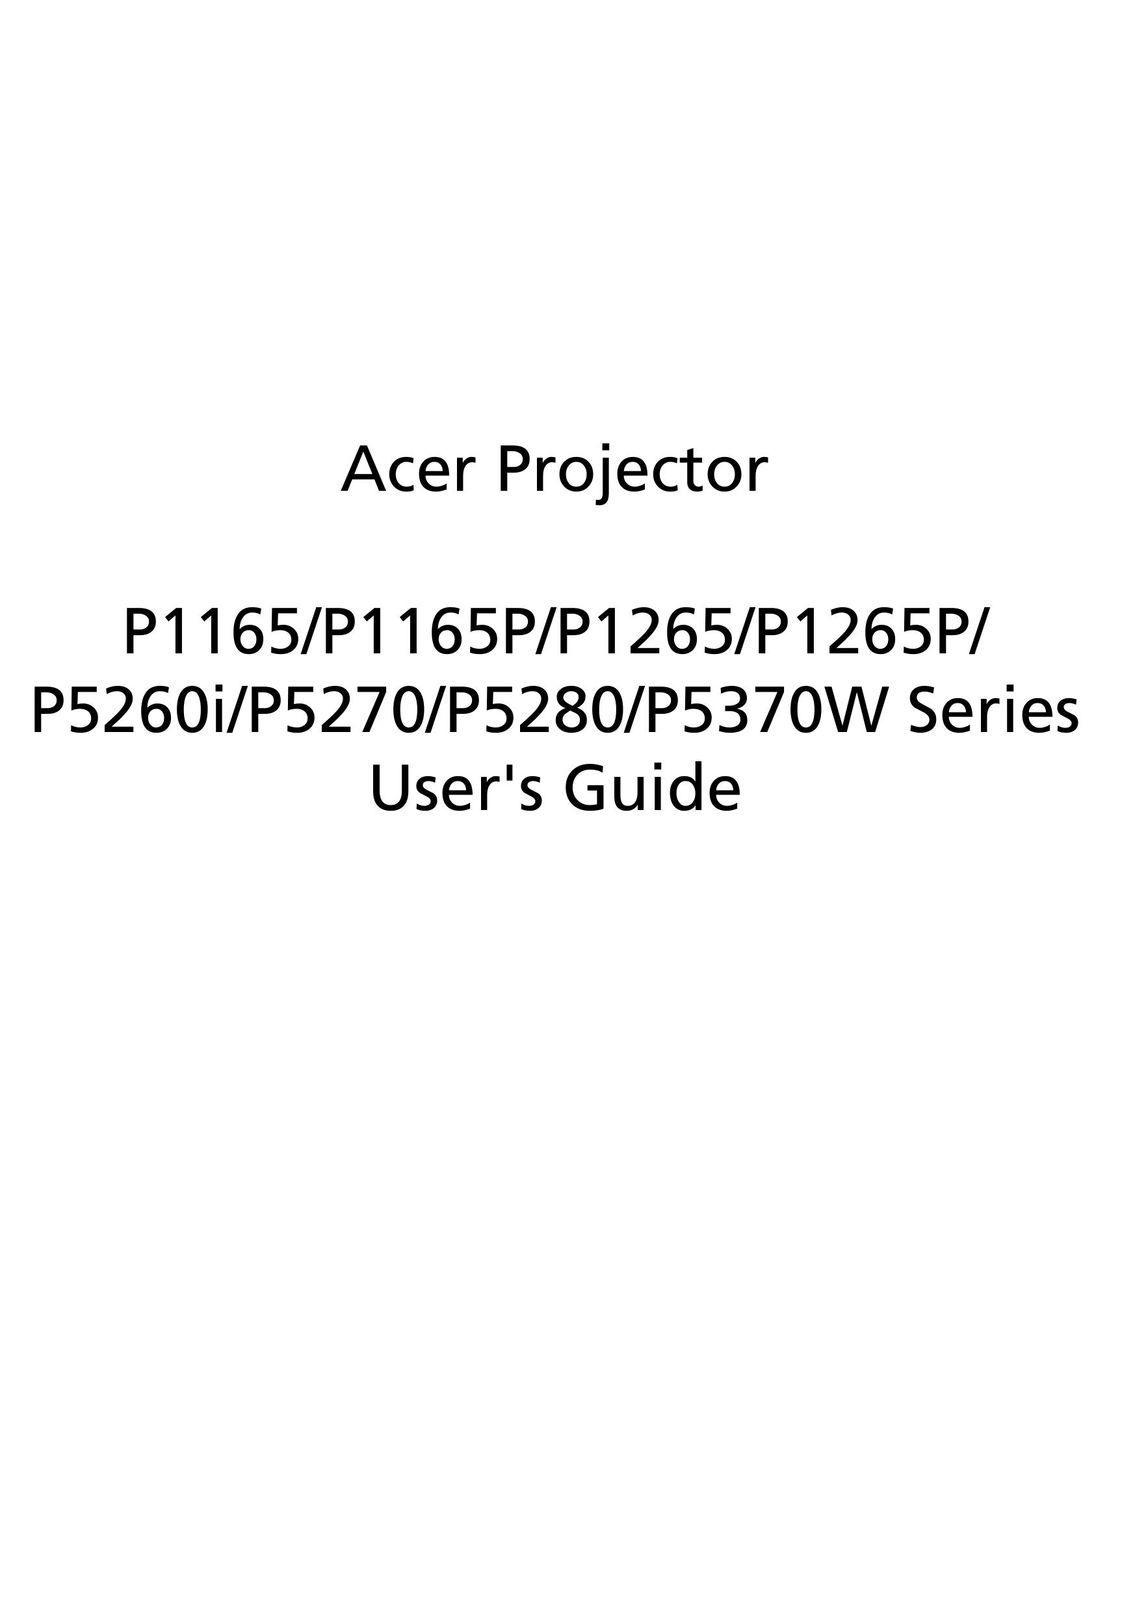 Acer P1265P Projector User Manual